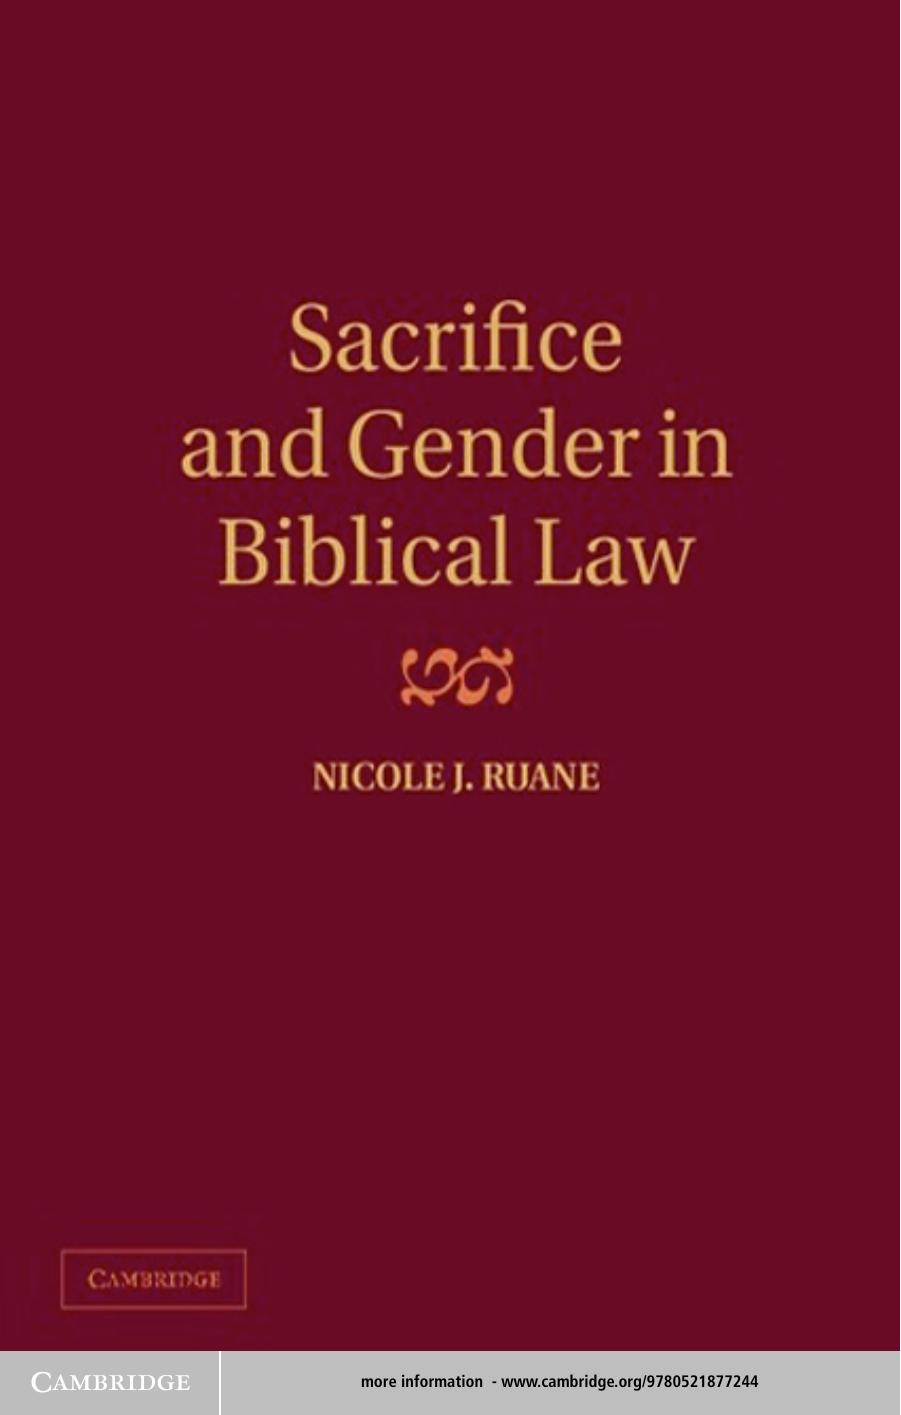 Sacrifice and Gender in Biblical Law by Nicole J. Ruane